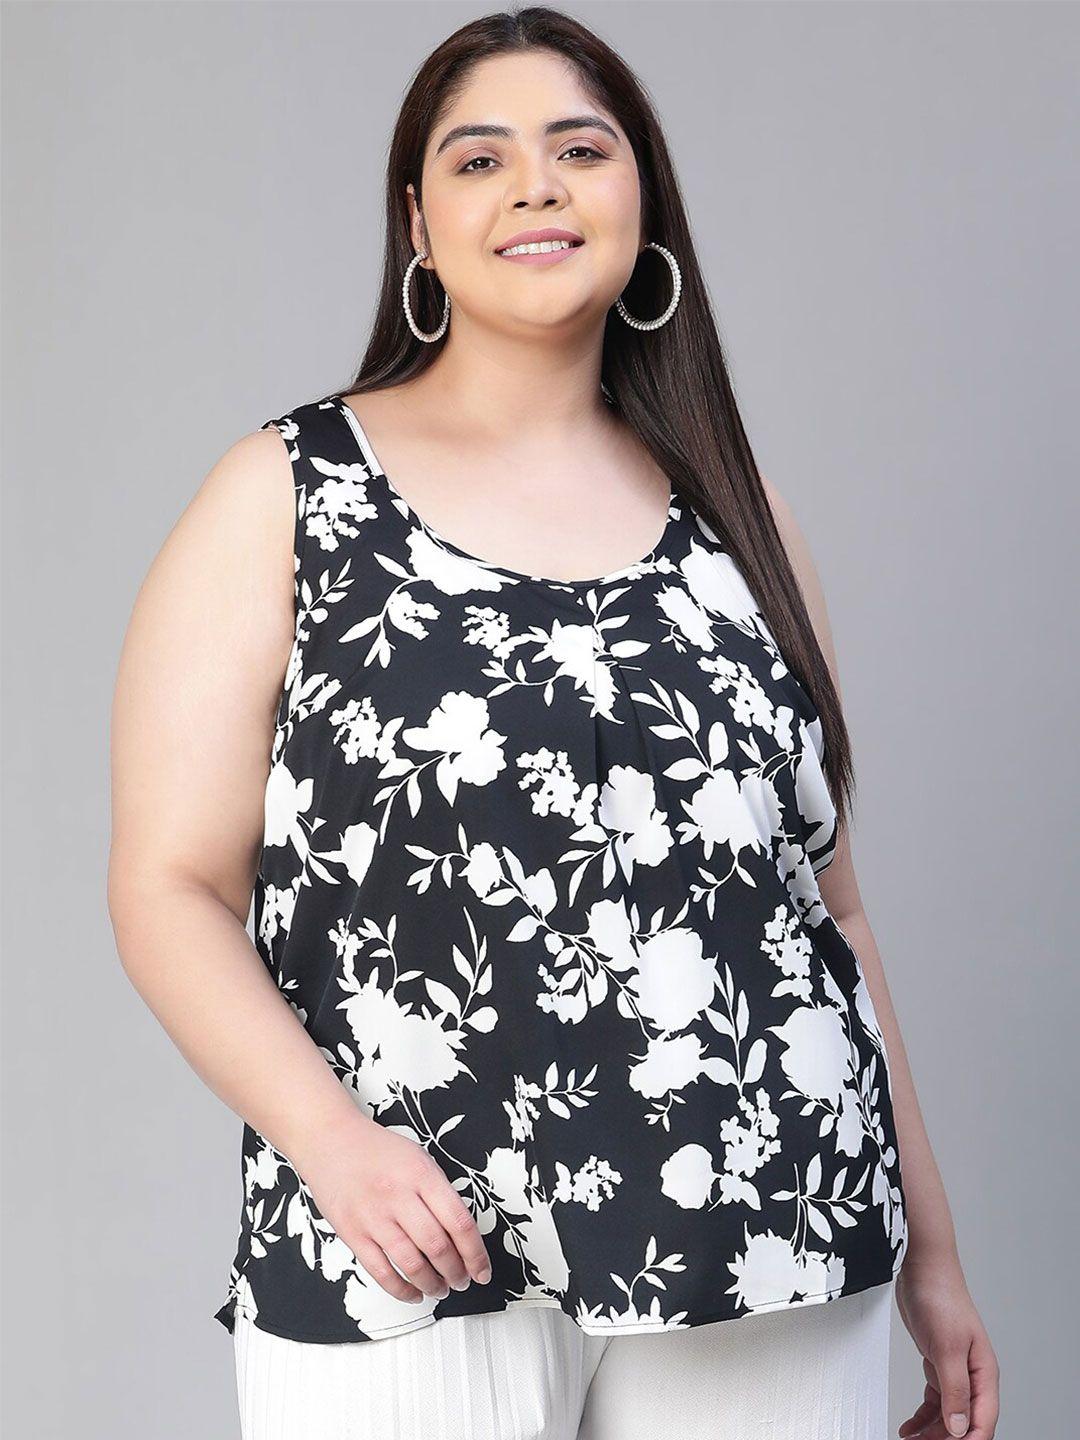 oxolloxo plus size floral printed scoop neck sleeveless top